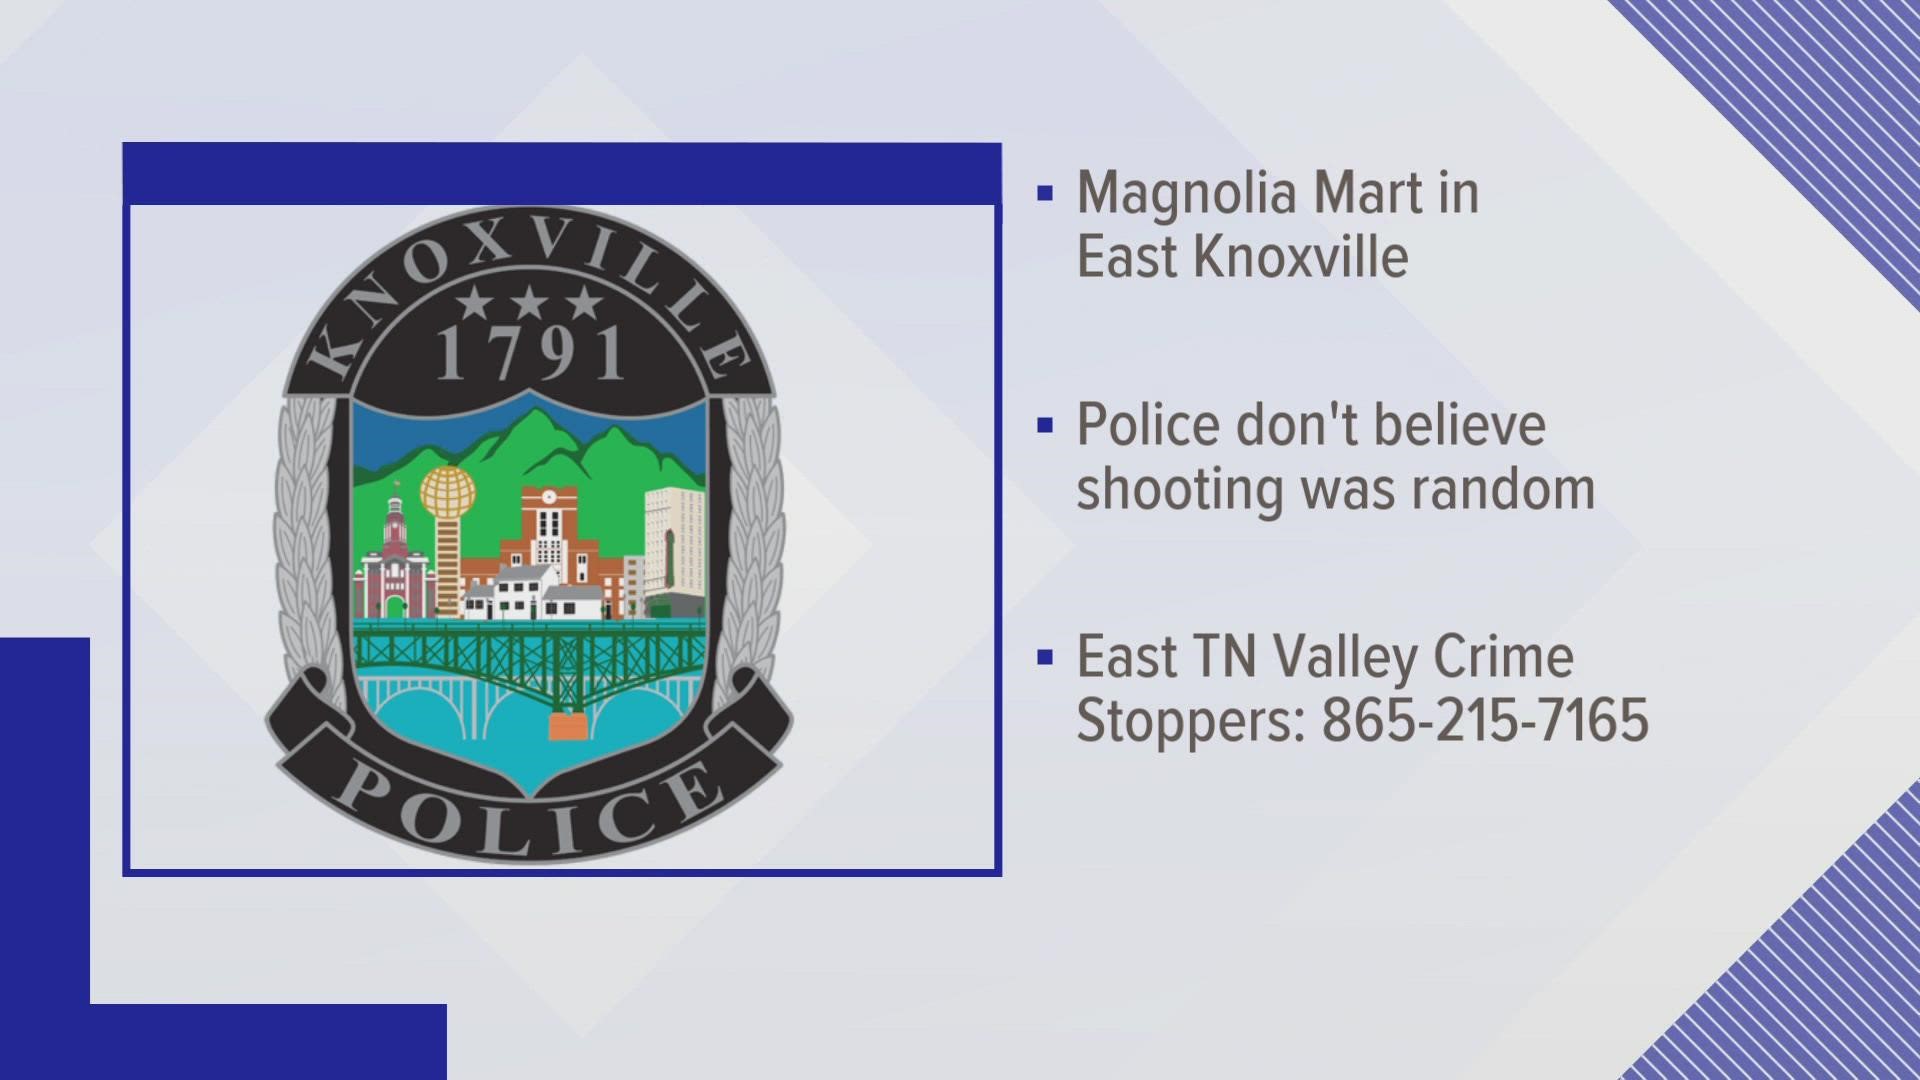 Investigators said the victim was filling up Thursday night at the Magnolia Mart in east Knoxville when he was shot in the leg.